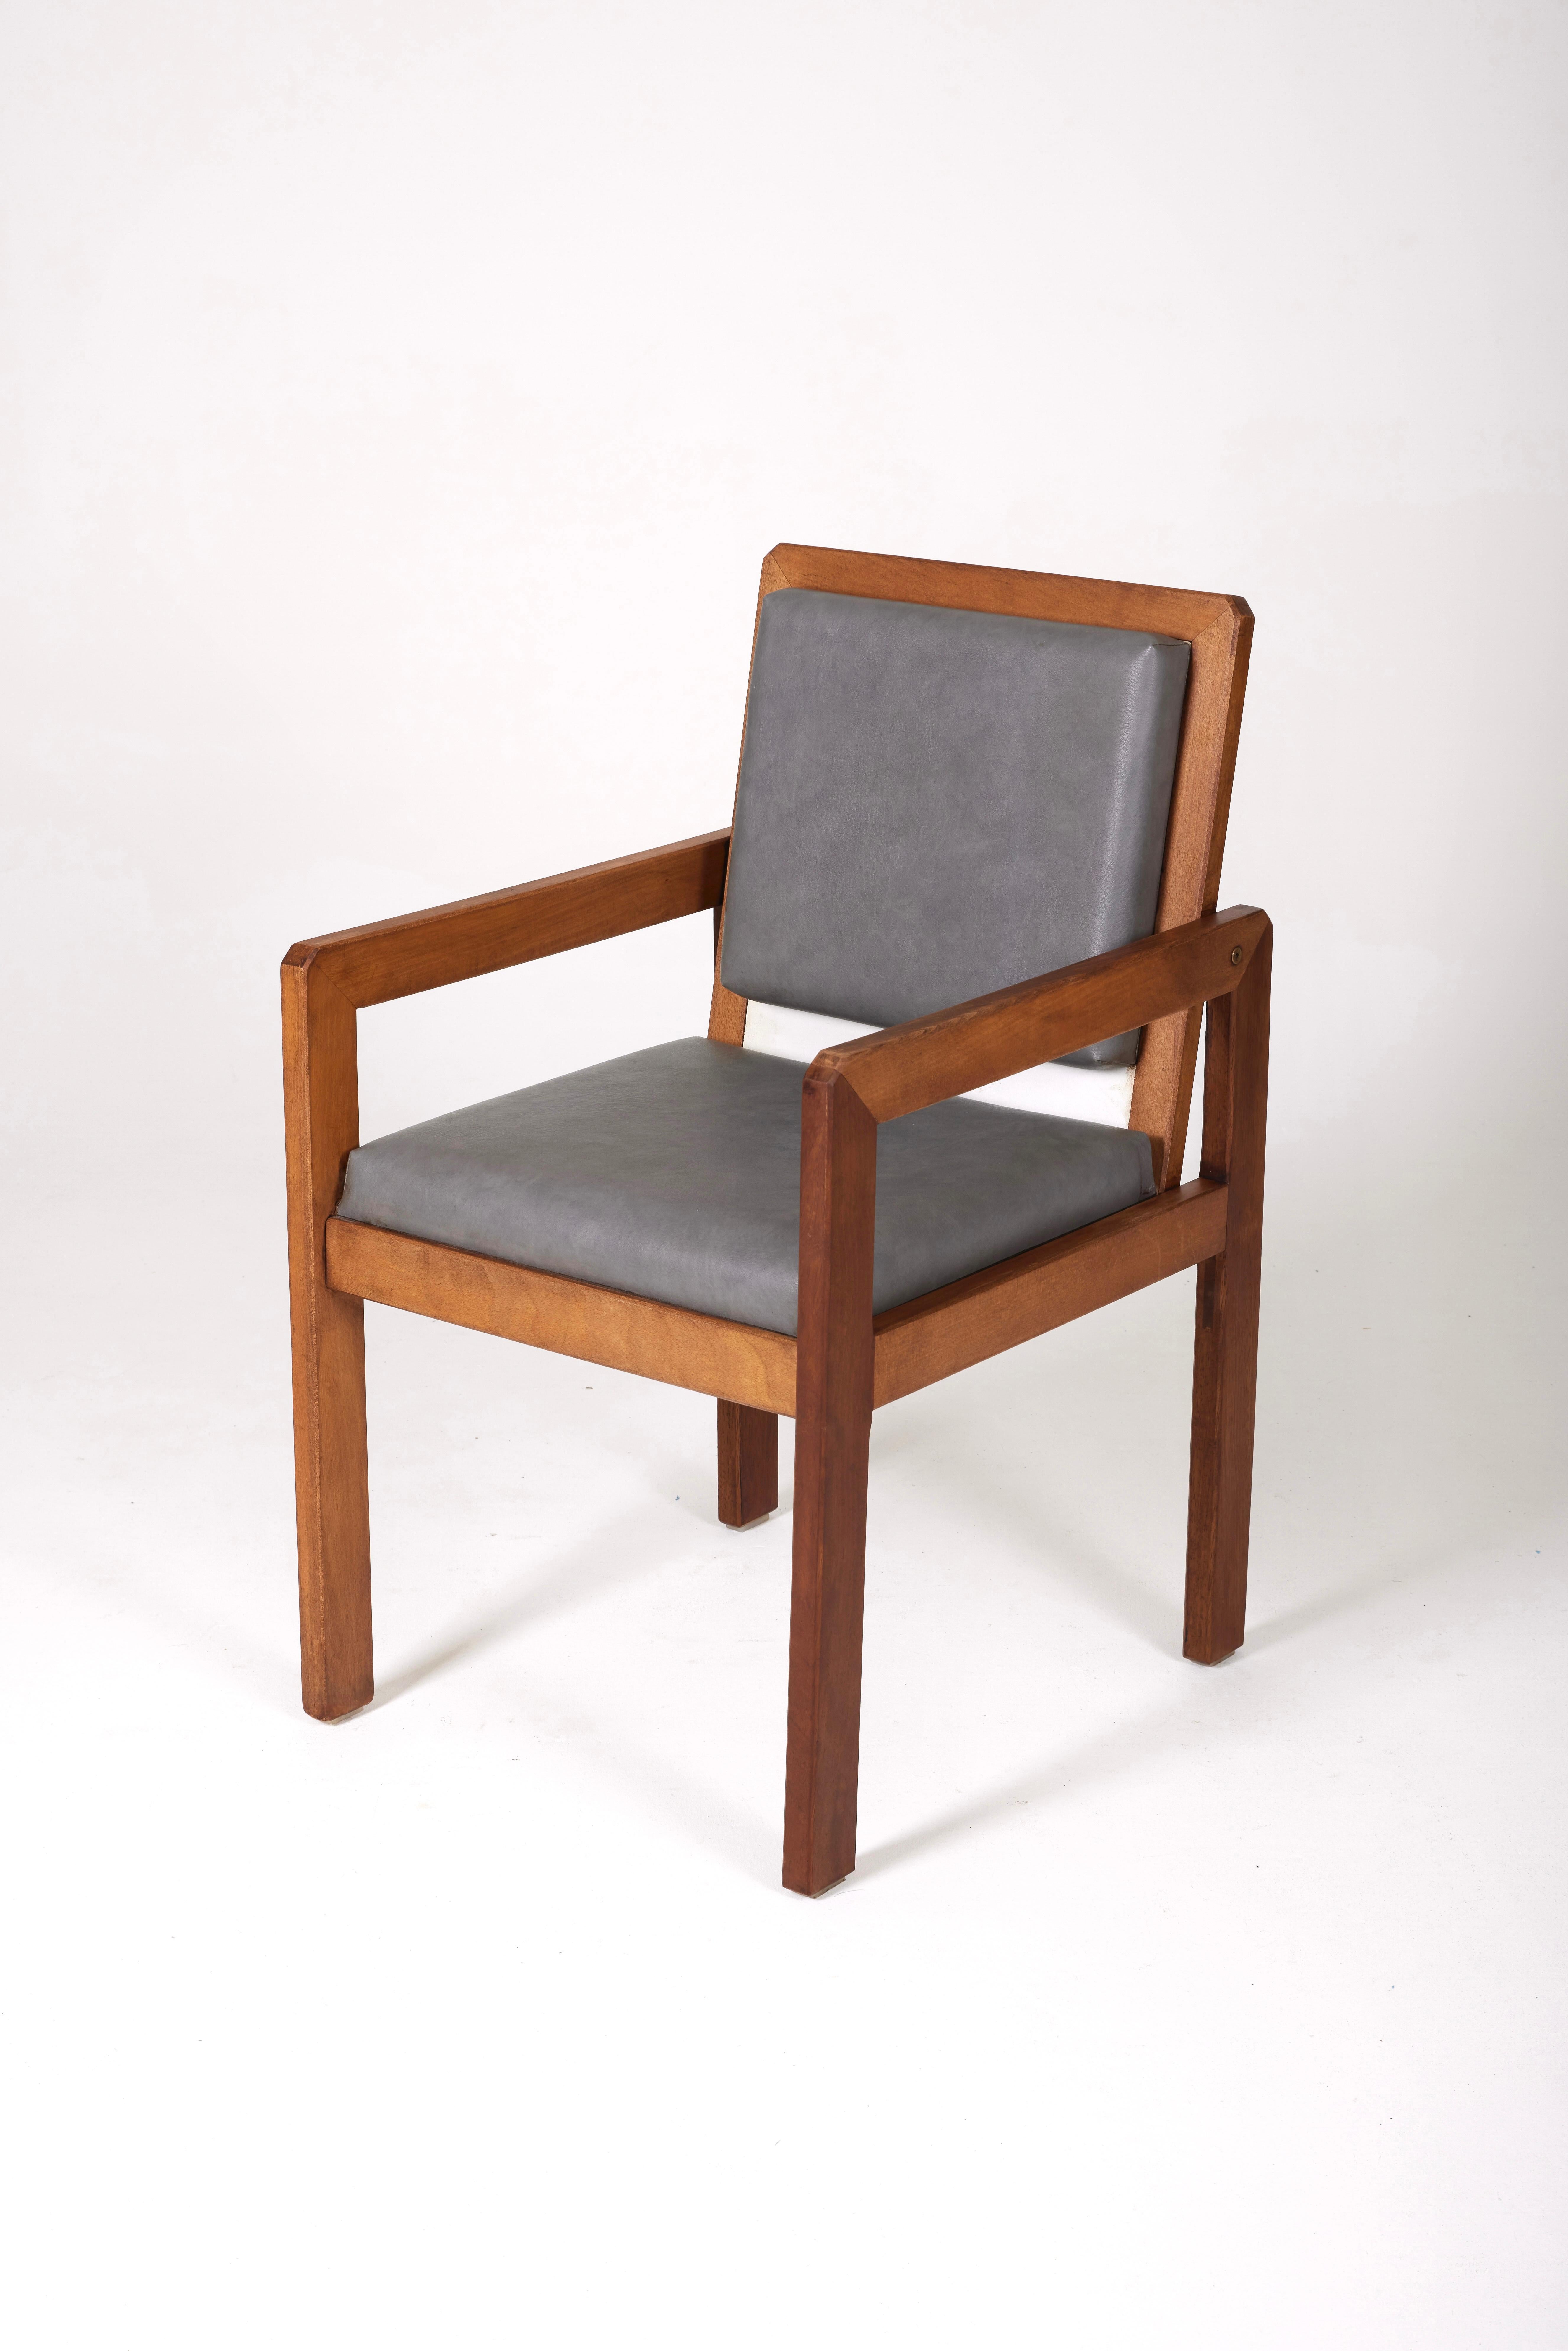 Armchair by French designer André Sornay, 1950s. Wooden frame, gray leather seat and back. Very good condition. 
Lp1150-1151